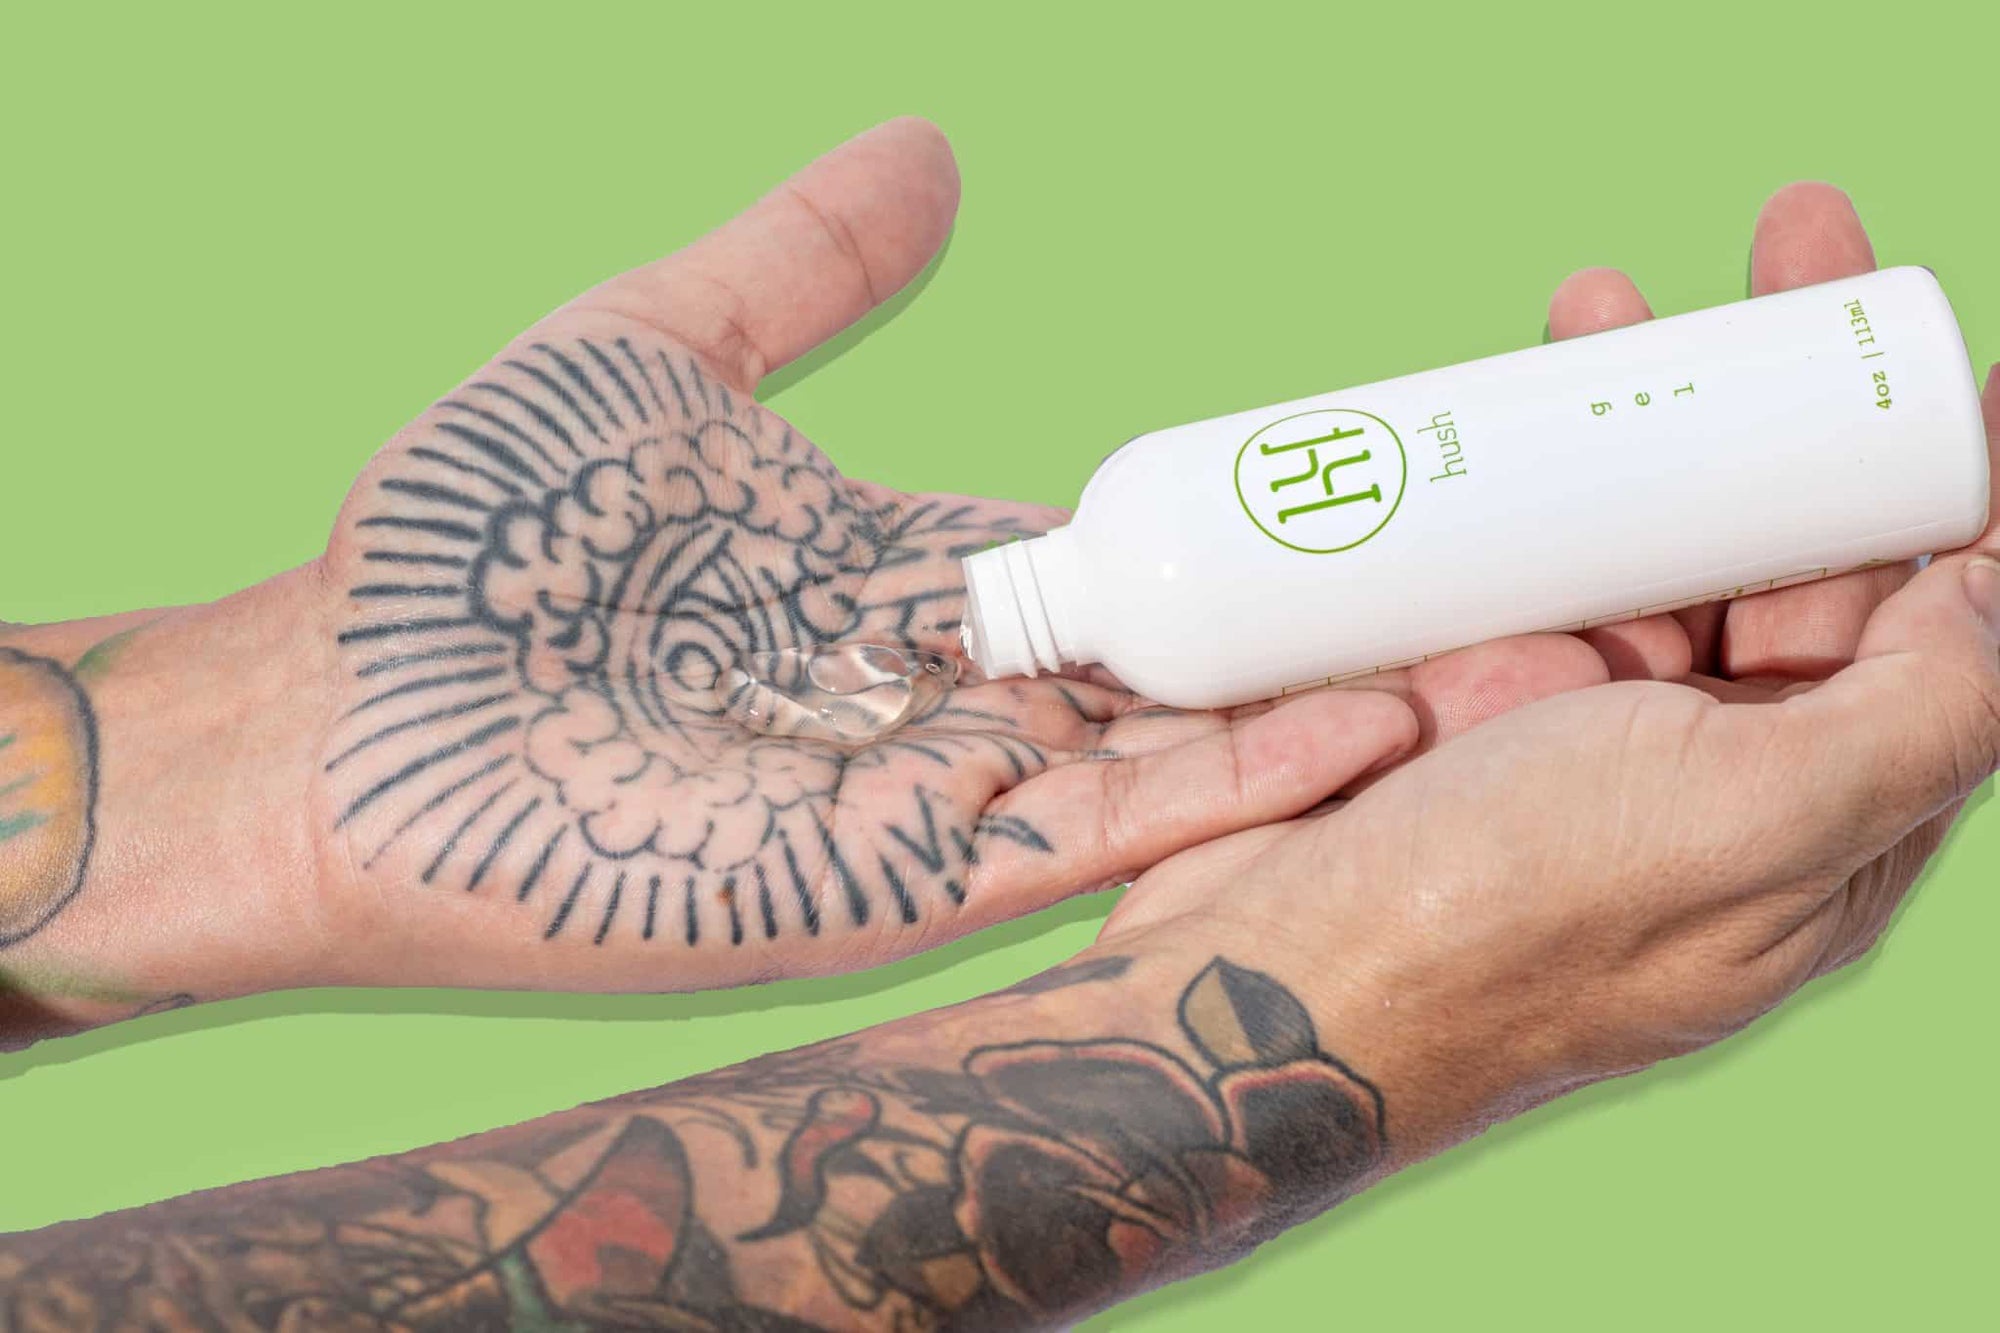 Why You Should Use a Gel Instead of a Tattoo Numbing Cream